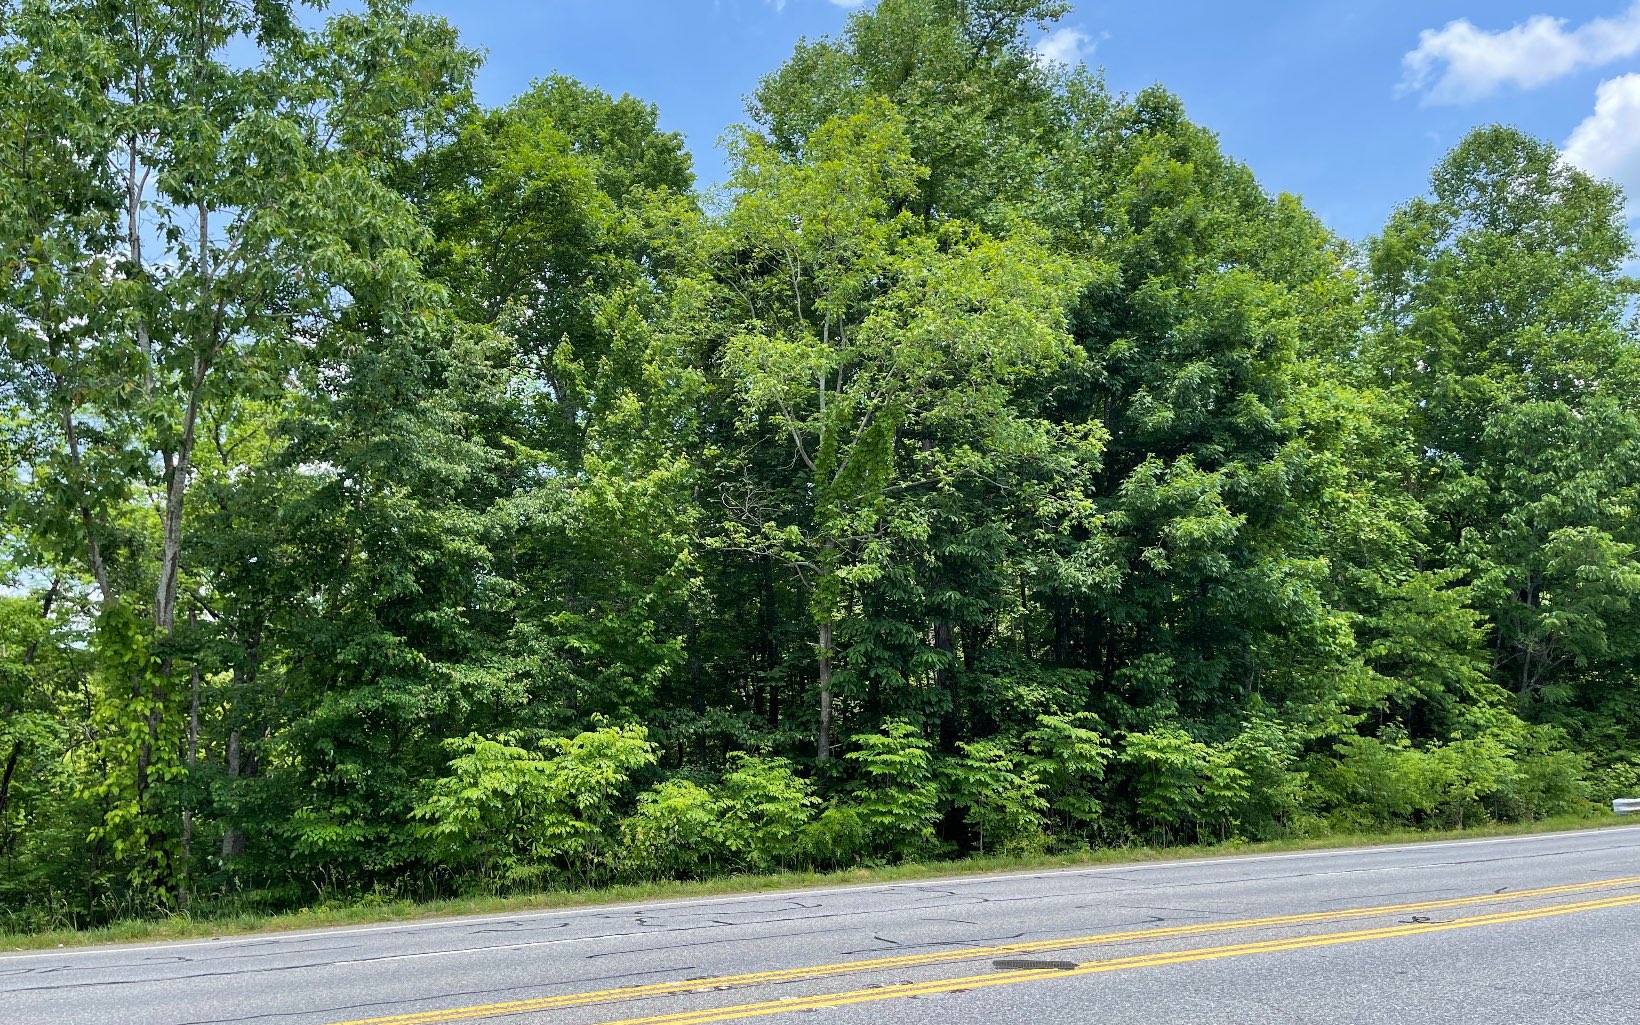 2.8+ ACRES, PRIVATE LAKEFRONT ESTATE OR COMMERCIAL TRACT ON HWY 76!! This beautifully wooded 2.85 acre tract offers frontage on pristine Lake Chatuge and frontage on the high traffic Hwy 76. Build your private lakefront estate on the backside of this wooded tract or build a commercial business on the front side of the tract on Hwy 76. THE BEST OF BOTH WORLDS!!